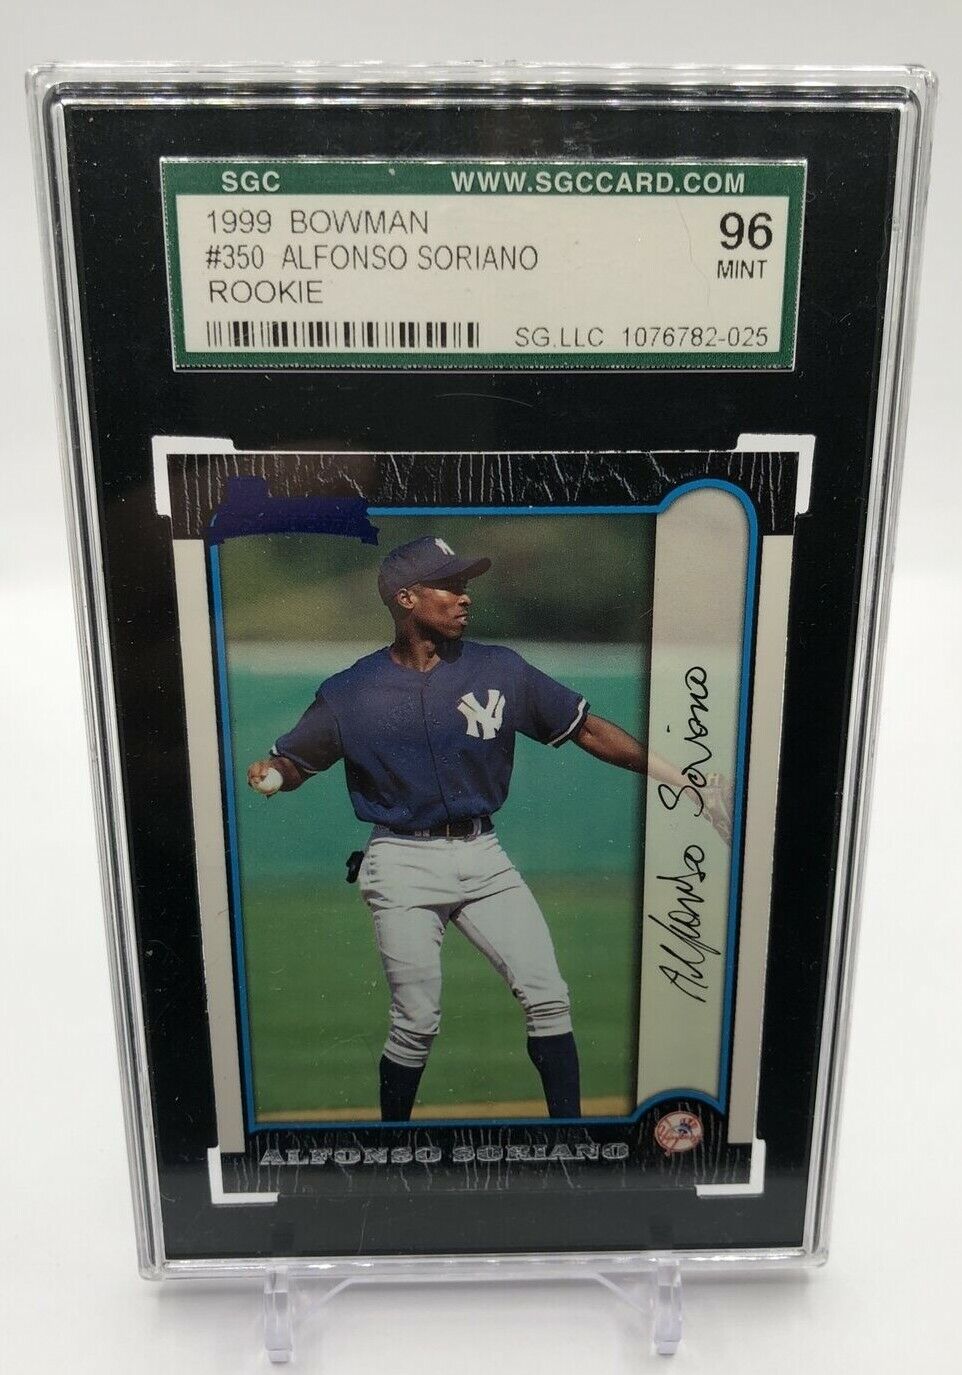 1999 Bowman Chrome #350 Alfonso Soriano RC Rookie Card SGC Mint 96. rookie card picture